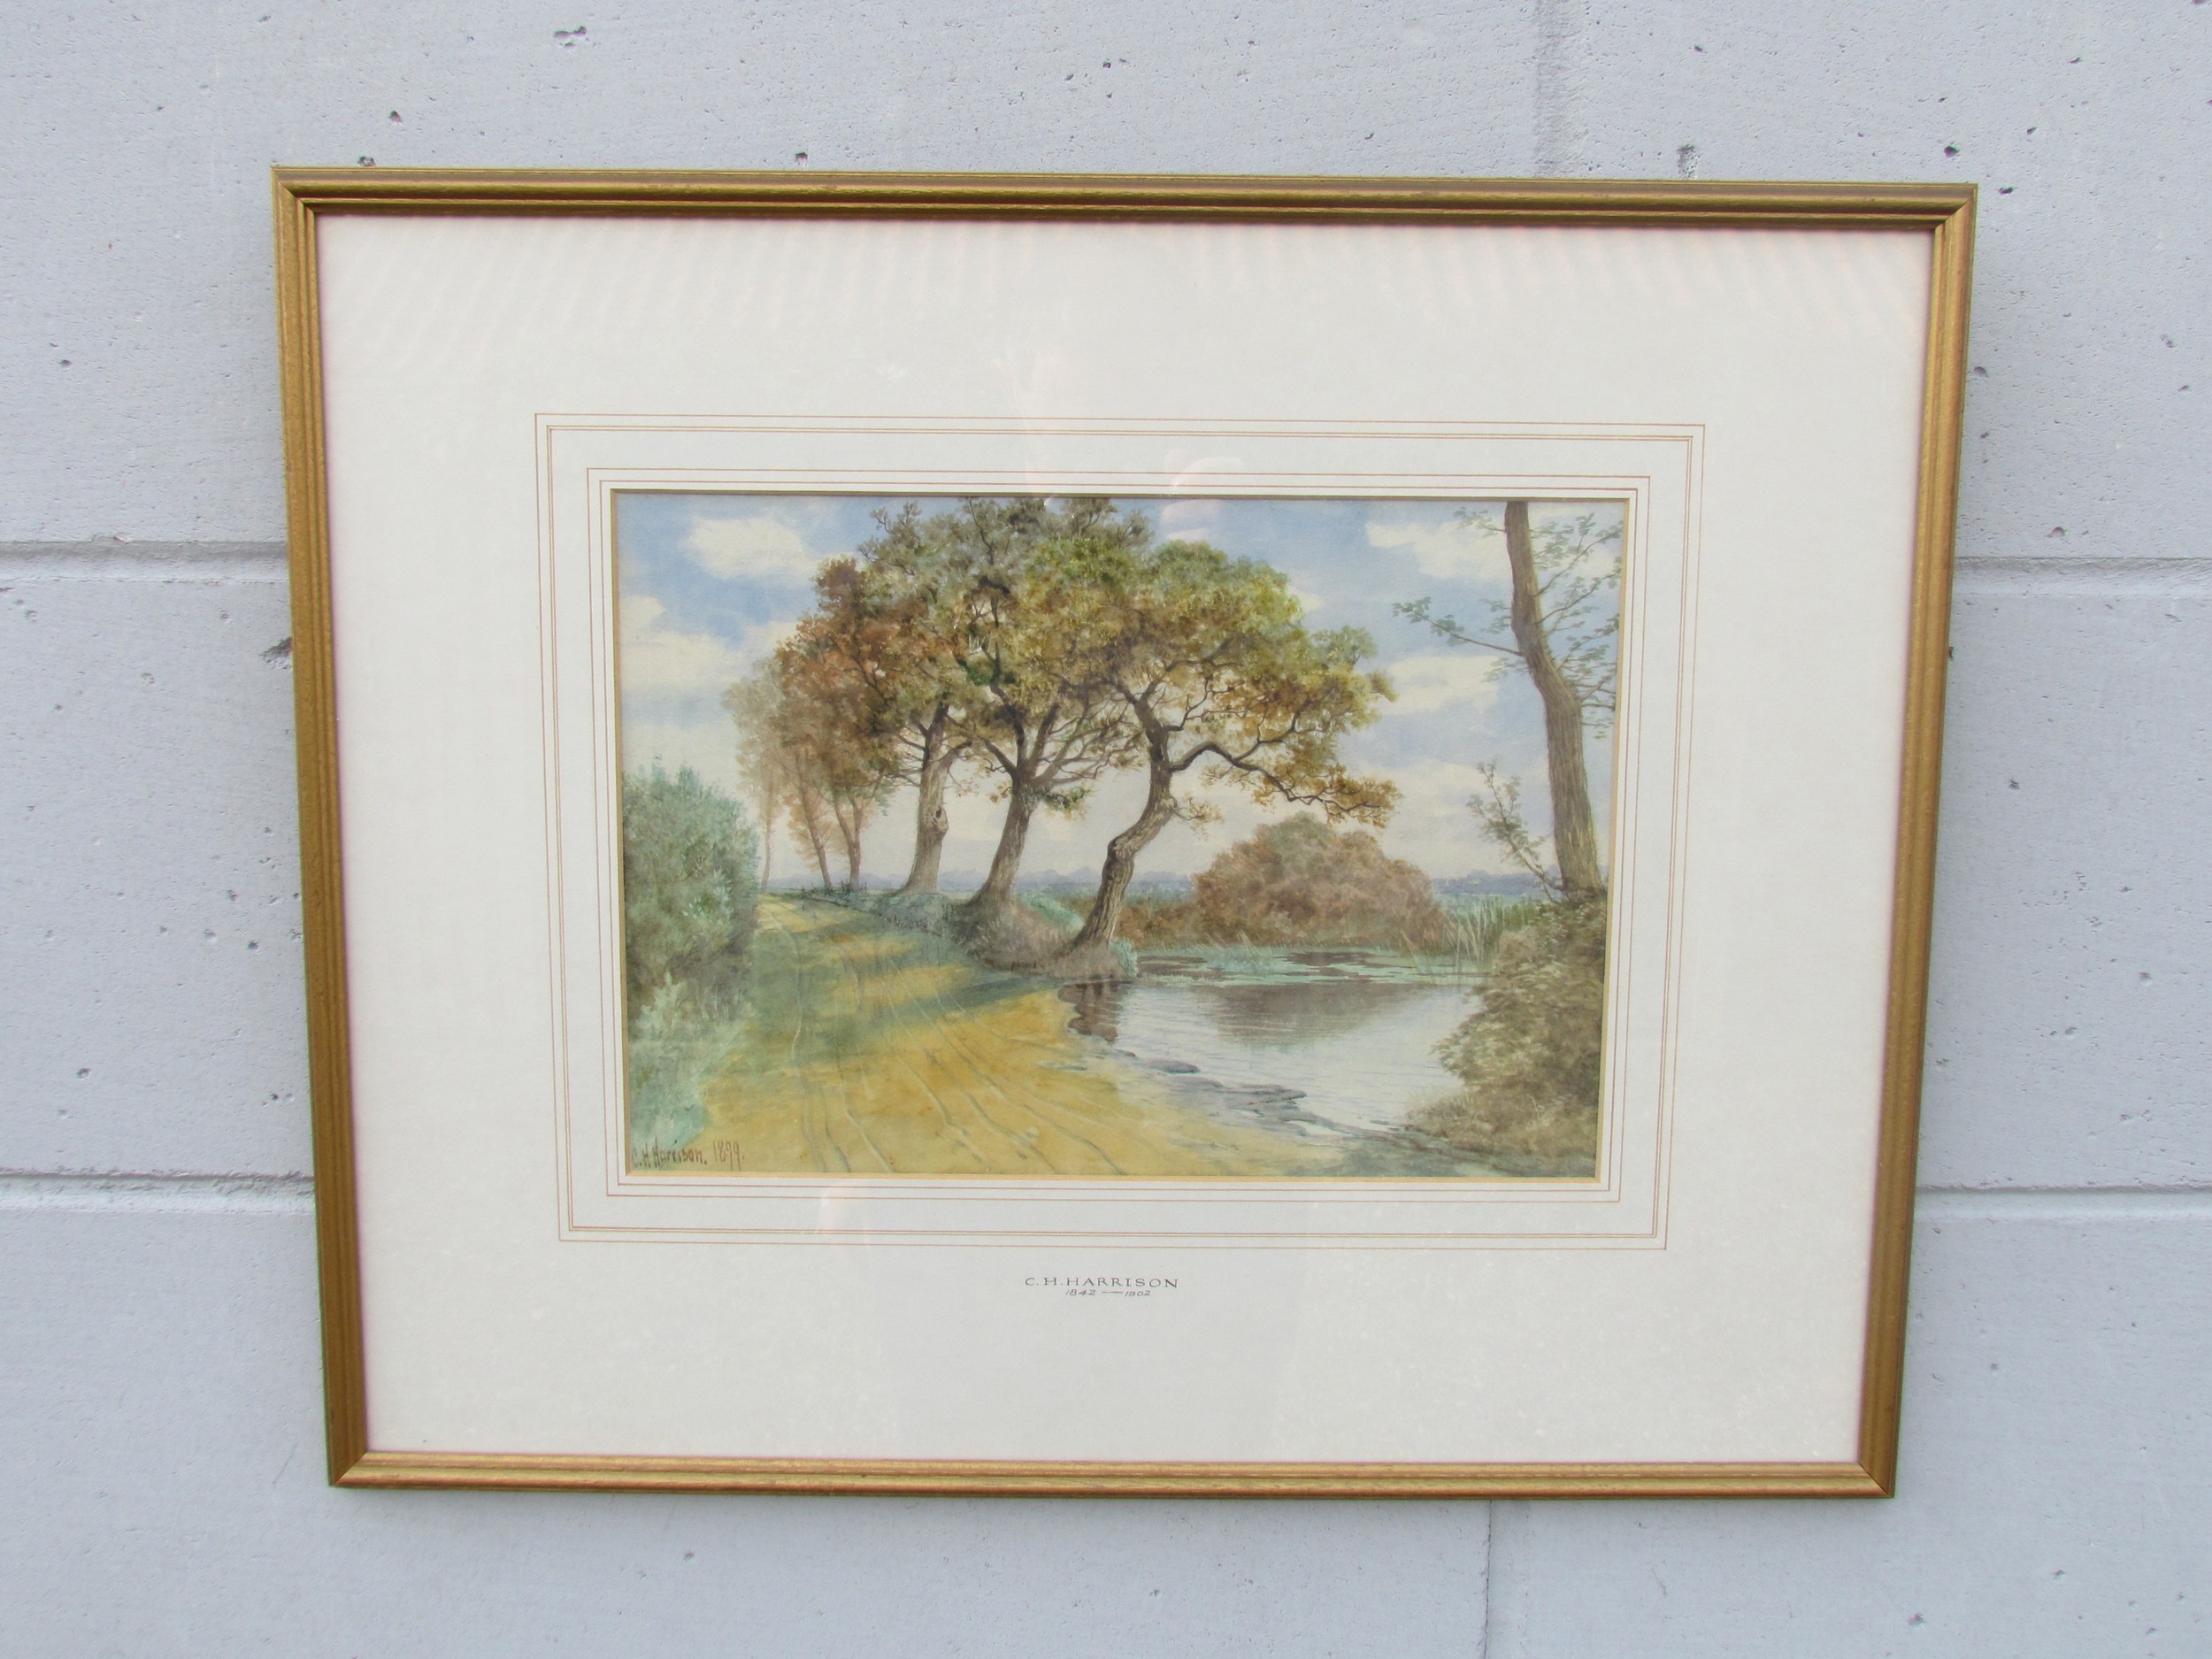 CHARLES HARMONY HARRISON (1842-1902) A framed and glazed watercolour, Broadland scene with trees.